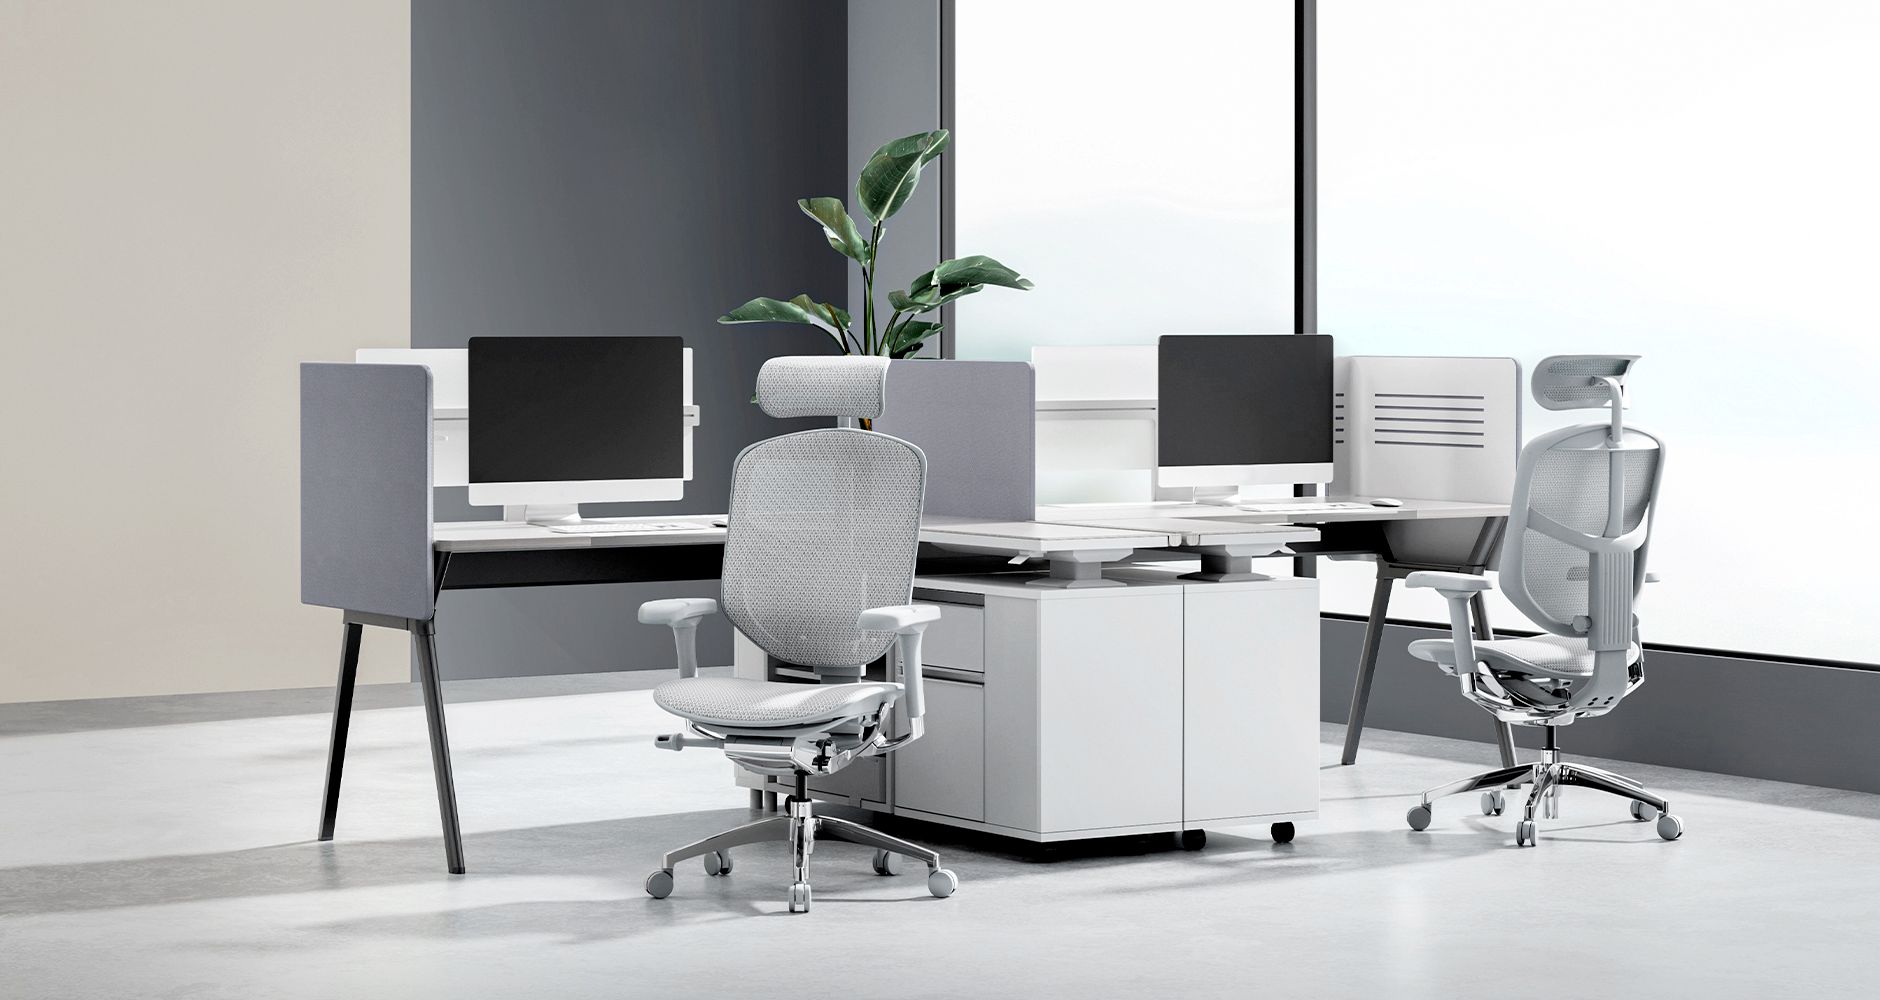 Two grey Enjoy Elite chairs are at two individual desks and booths. On the desks are monitors and keyboards. Between the desks is a storage unit. In the background is a large window to let in natural light. 